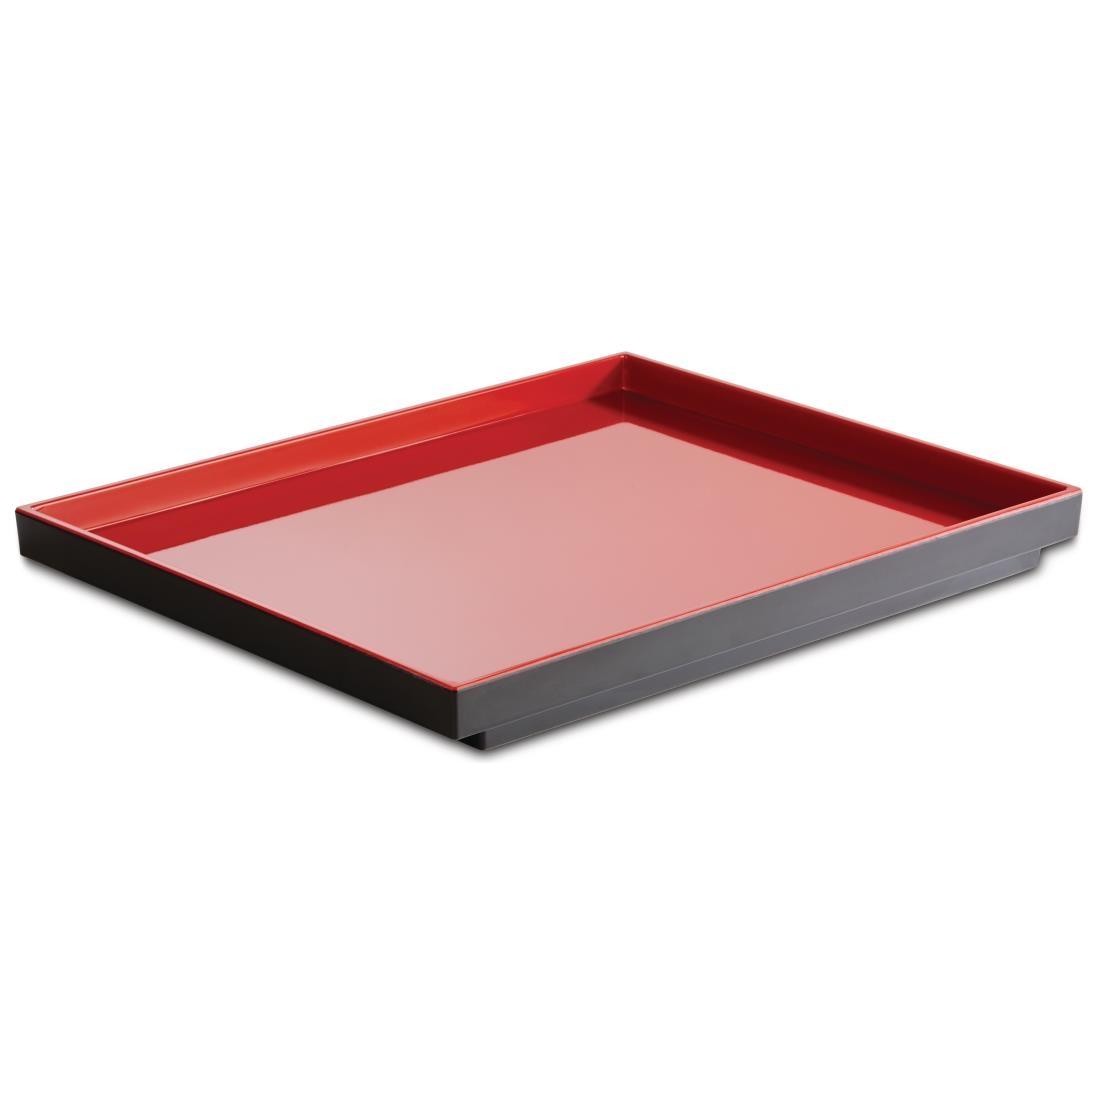 APS Asia+  Red Tray GN 1/2 - Each - DT775 - 1